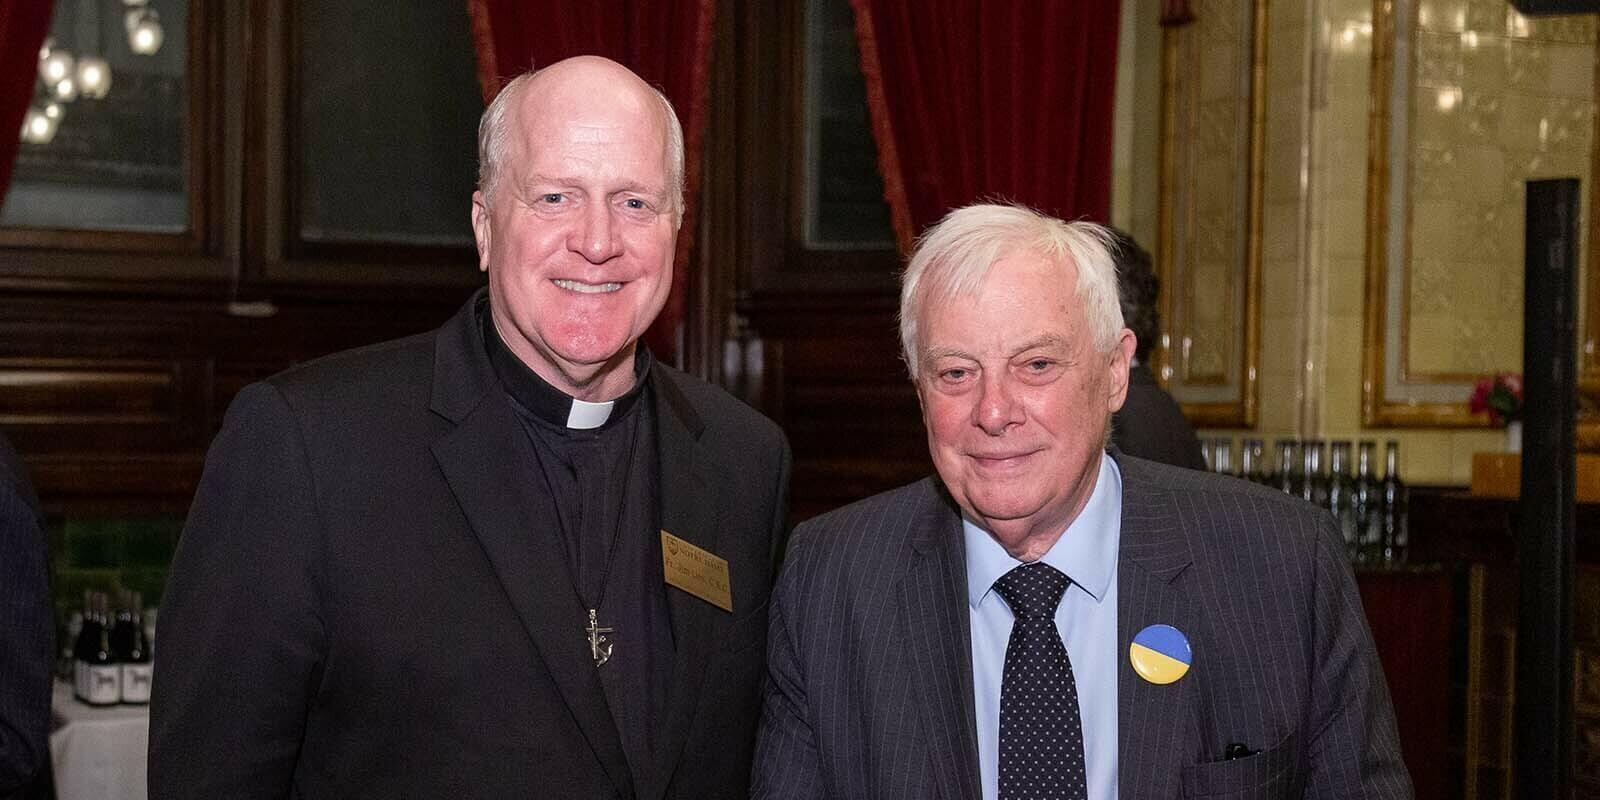 Fr. Jim Lies with Chris Patten, Lord Patten of Barnes, during the 2022 Barrett Family Lecture in London.